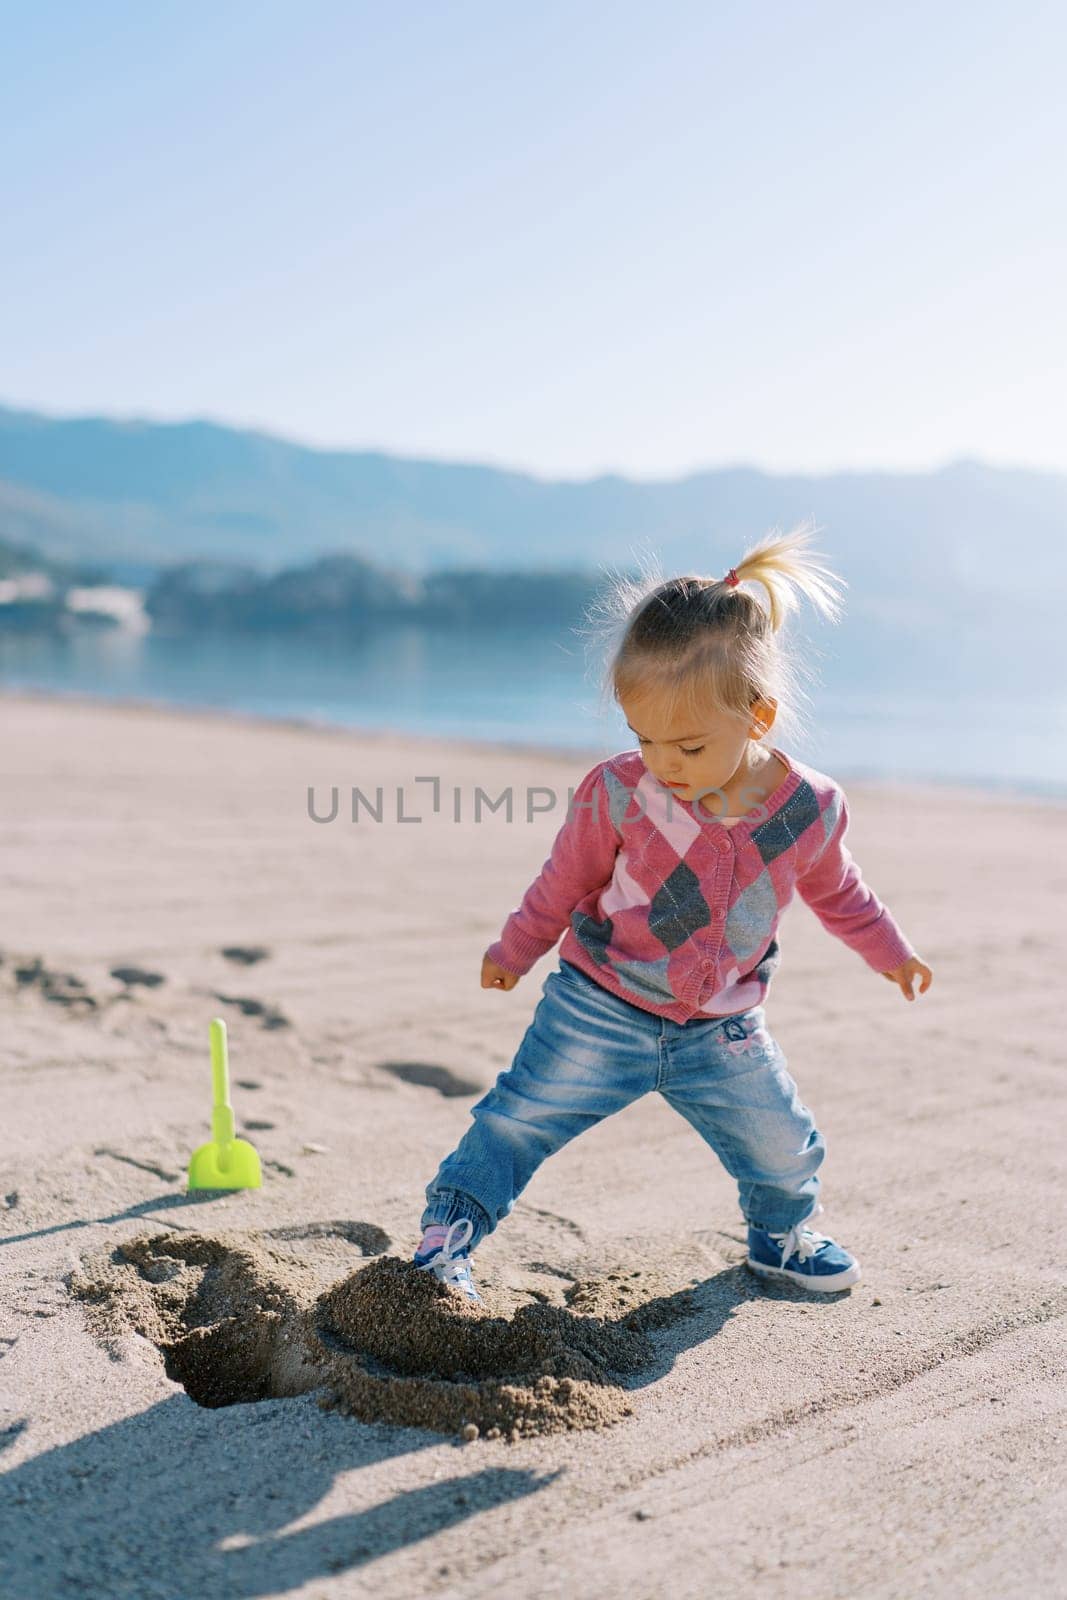 Little girl fills a hole in the sand with her foot near a toy shovel. High quality photo